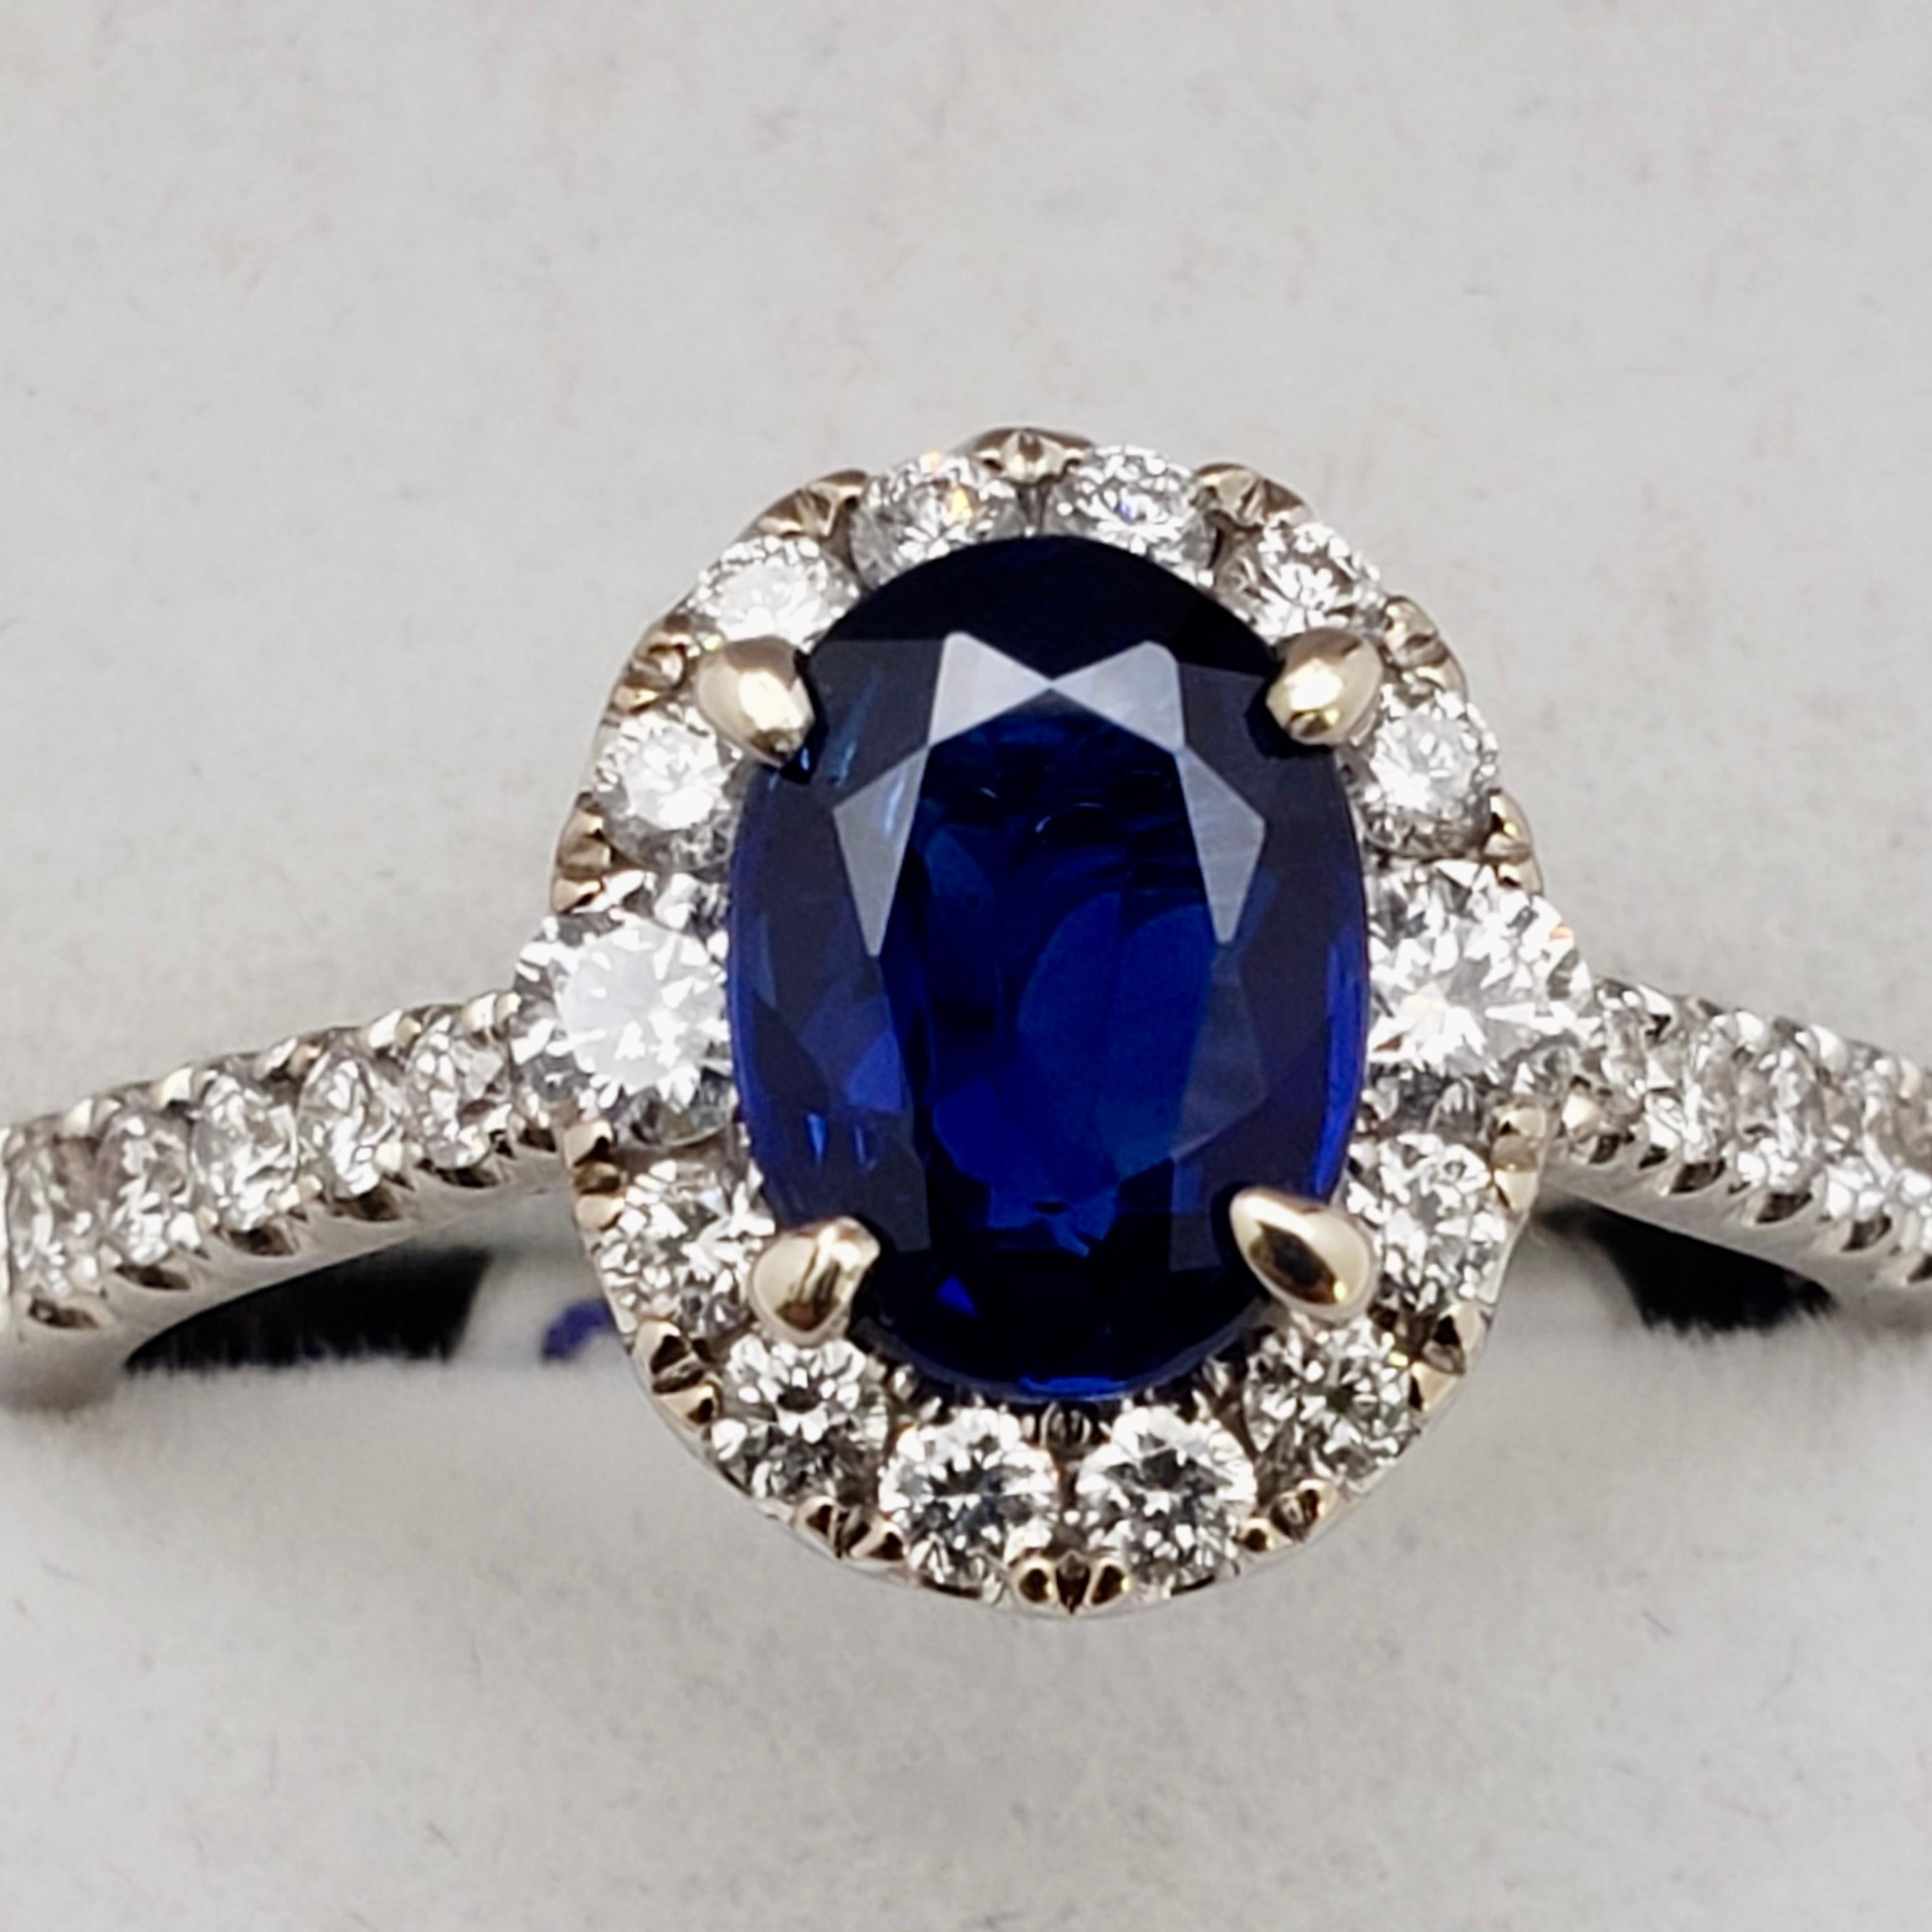 An original 18K white gold diamond and sapphire ring. Mounted with one GIA certified natural unheated oval shaped sapphire (natural corundum), report number: 2223878340. This sapphire measures 7.66 x 5.64 x 2.92 mm, and weighs approximately 1.50 CT.